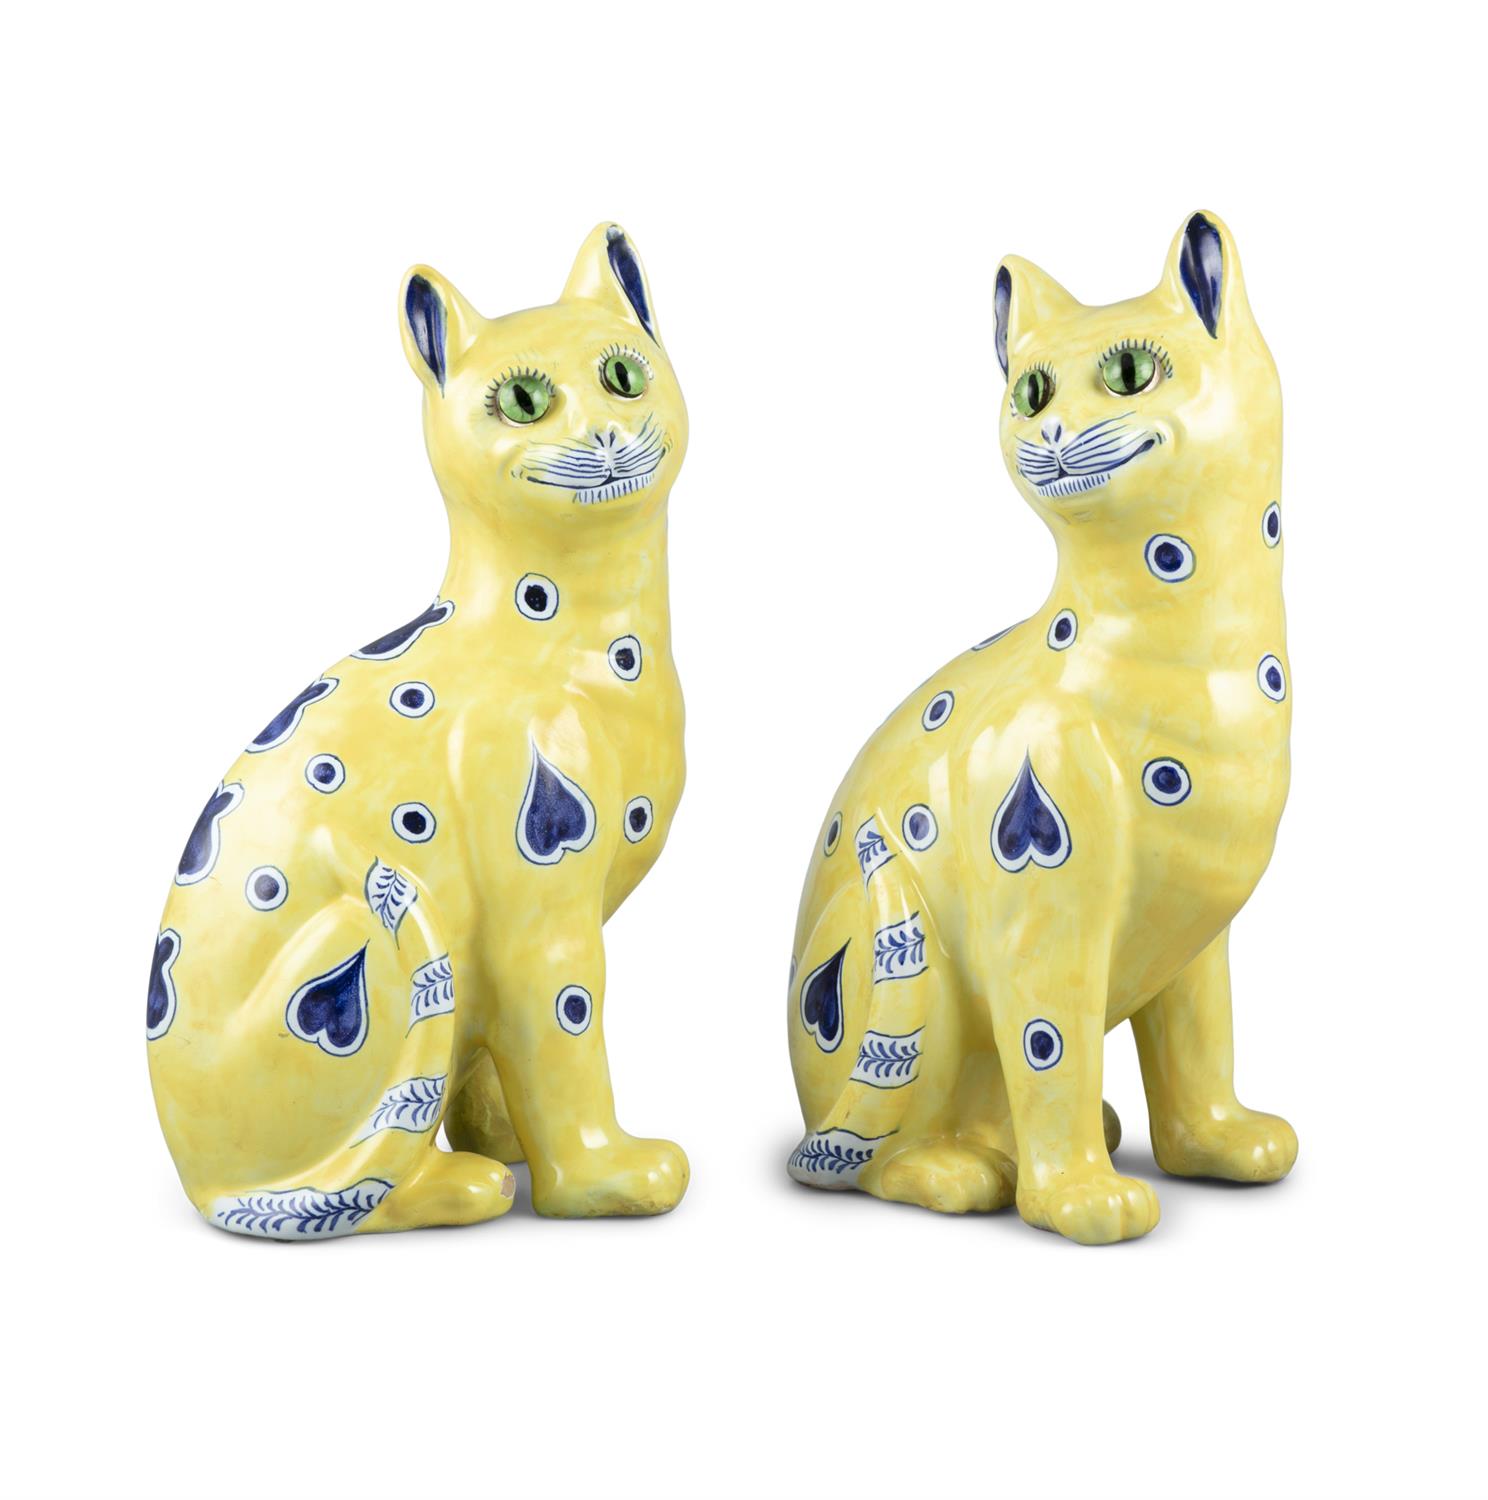 A PAIR OF GALLÉ FAIENCE WARE CATS, modelled in seat position, decorated with blue hearts and polka